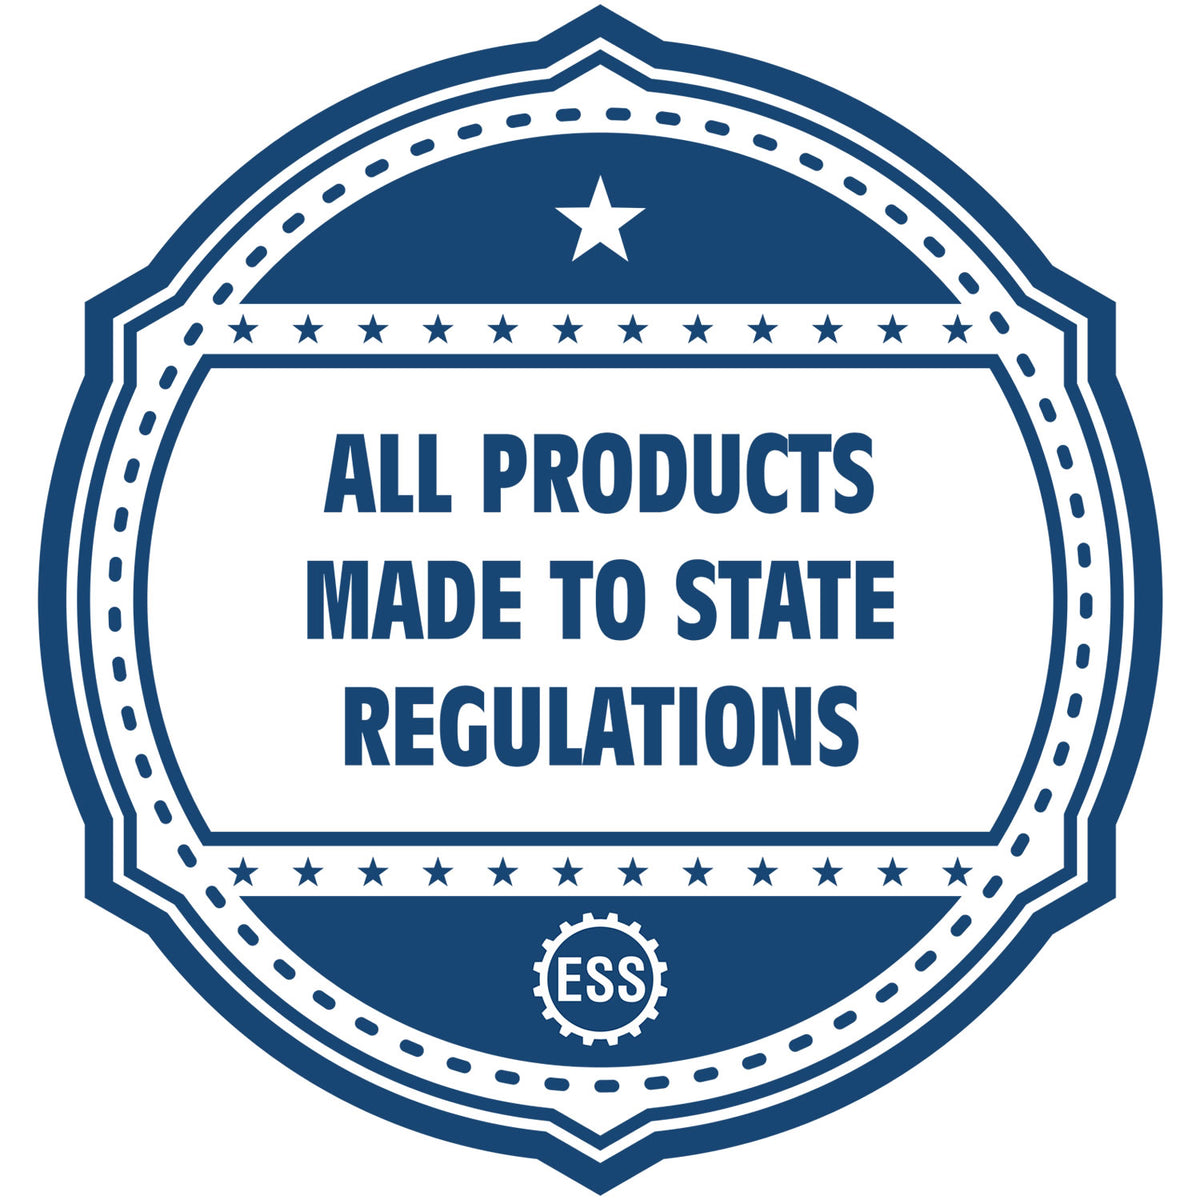 An icon or badge element for the Slim Pre-Inked Wyoming Professional Engineer Seal Stamp showing that this product is made in compliance with state regulations.